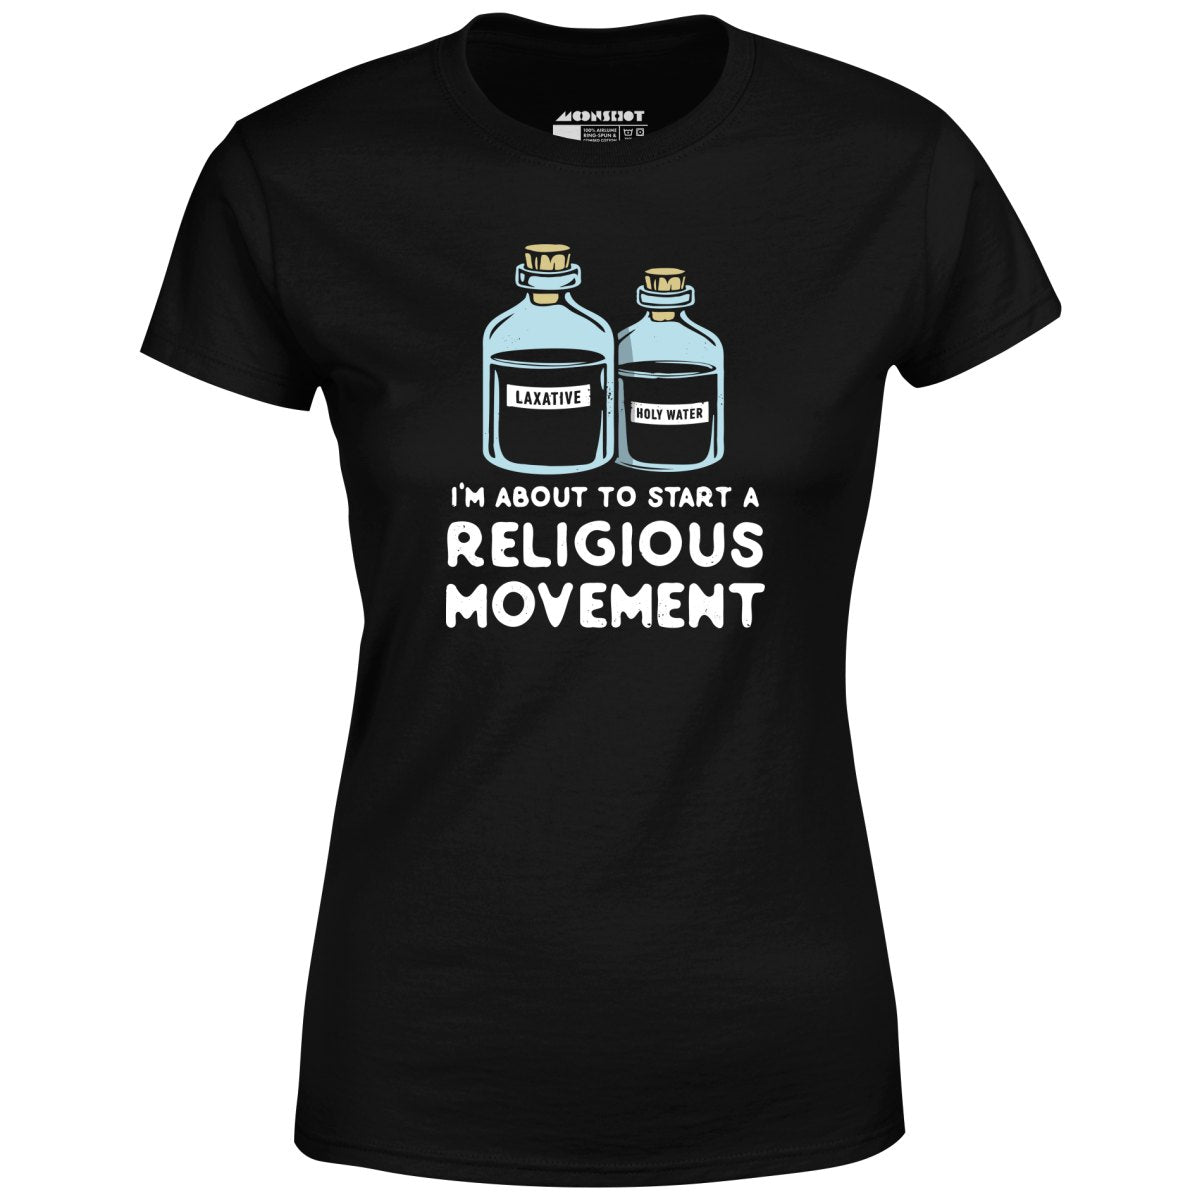 I'm About to Start a Religious Movement - Women's T-Shirt